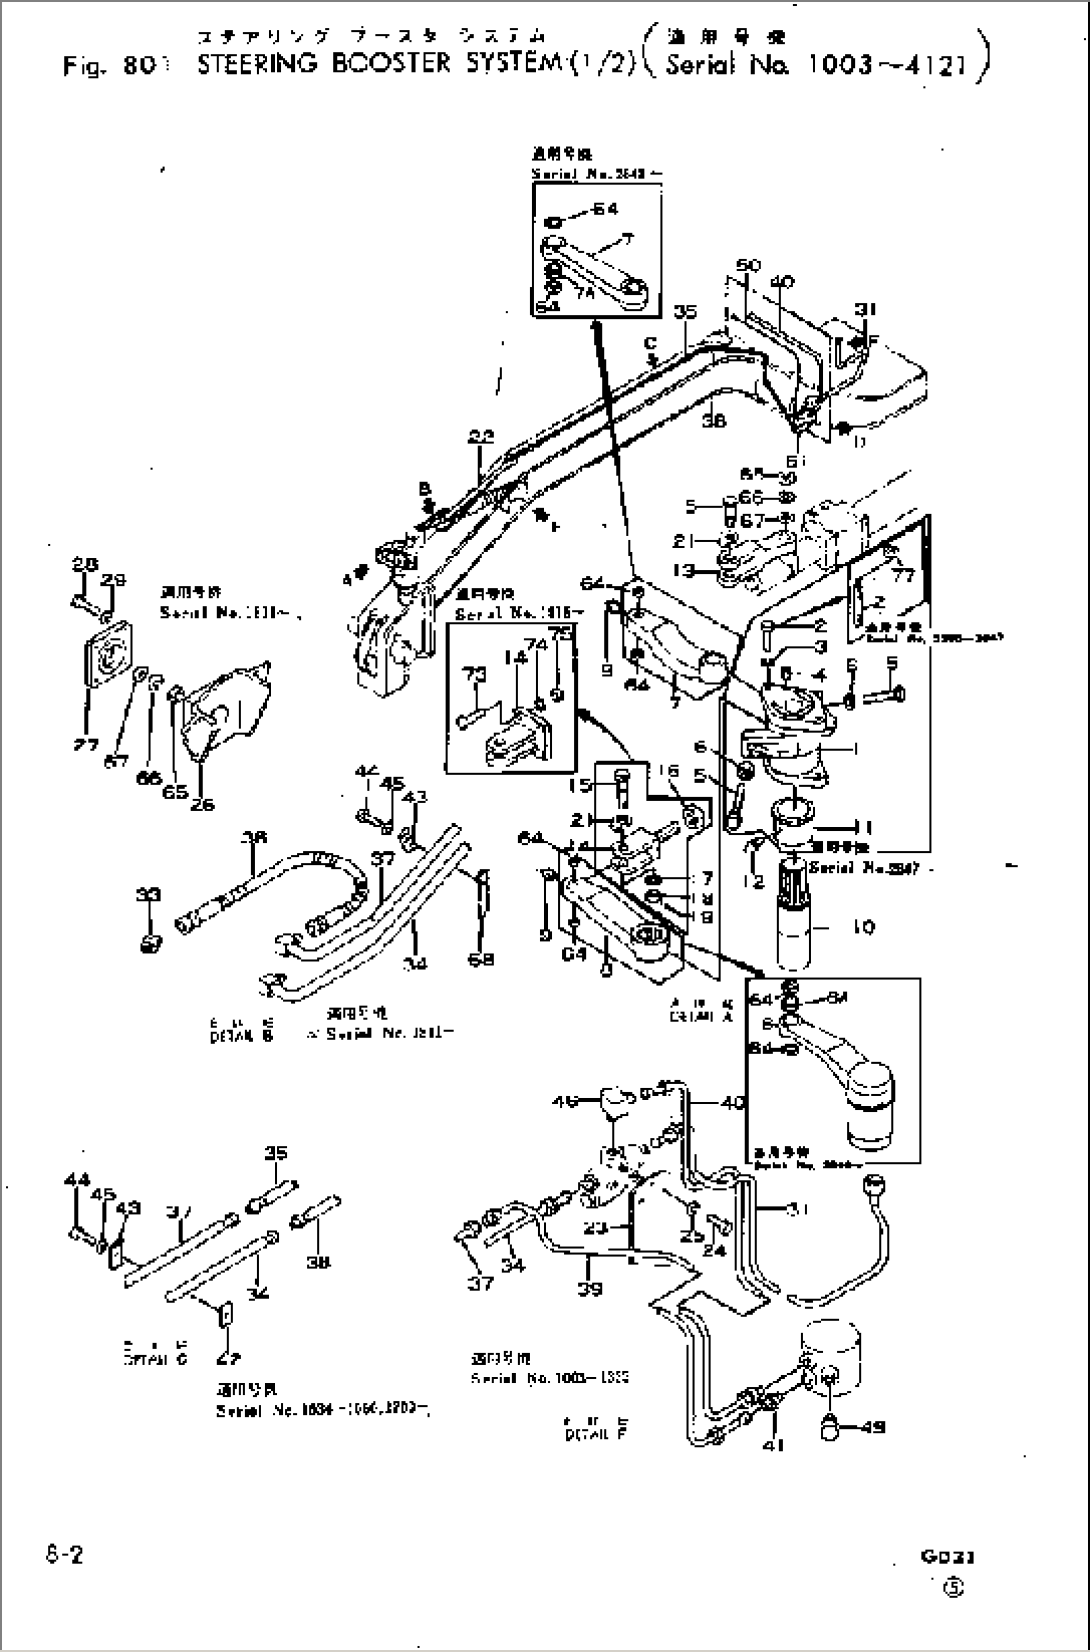 STEERING BOOSTER SYSTEM (1/2)